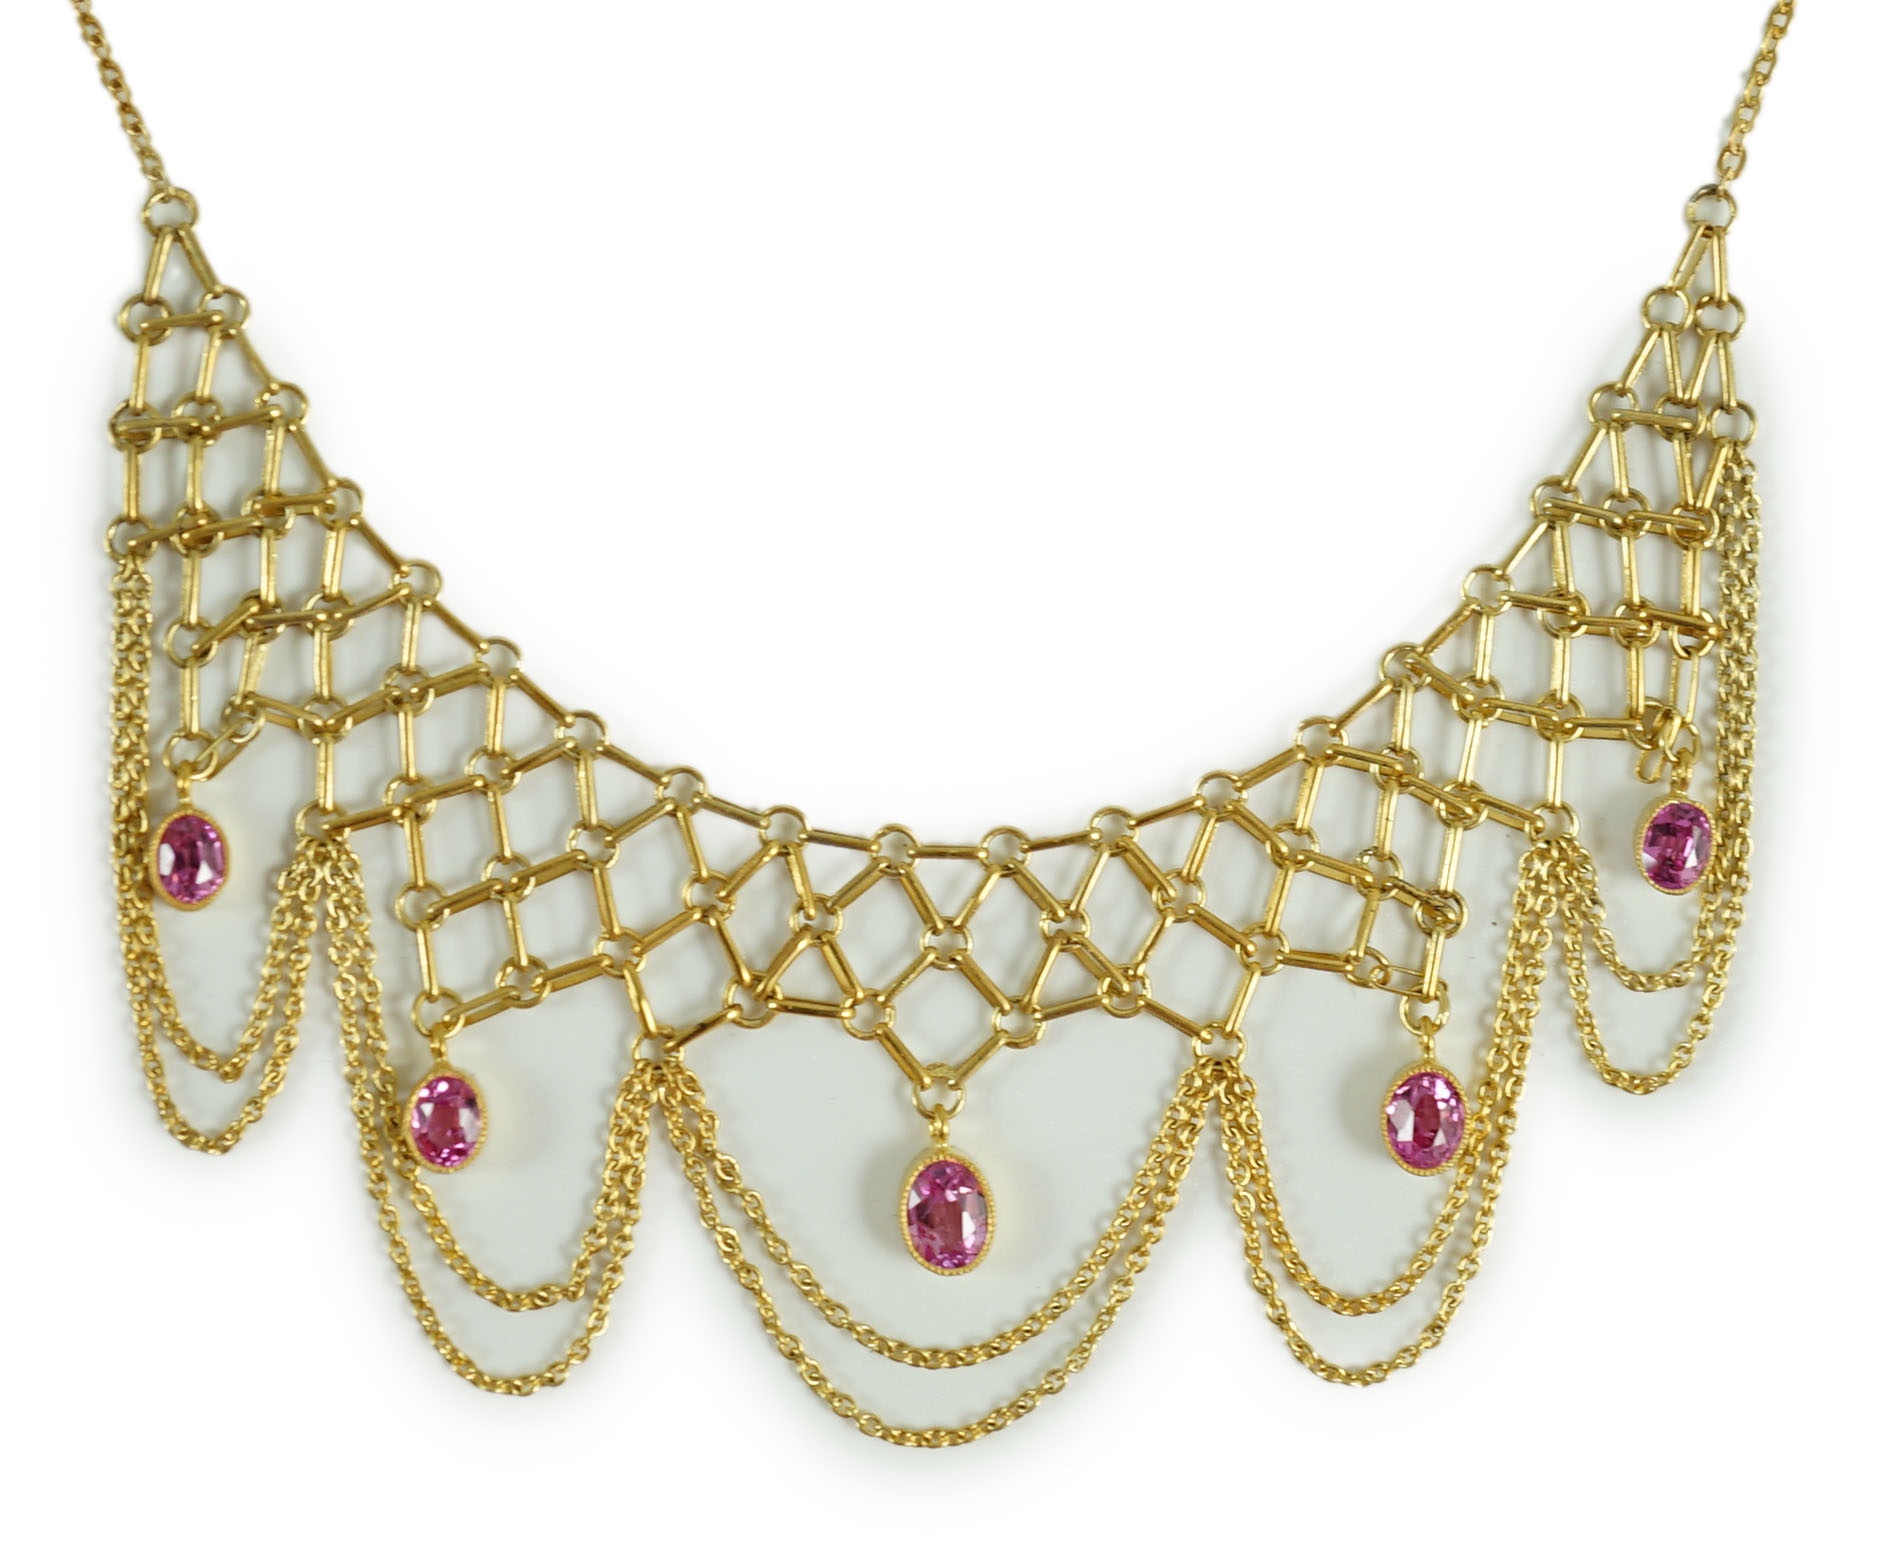 A 20th century 14k gold and five stone oval cut pink topaz set drop fringe necklace